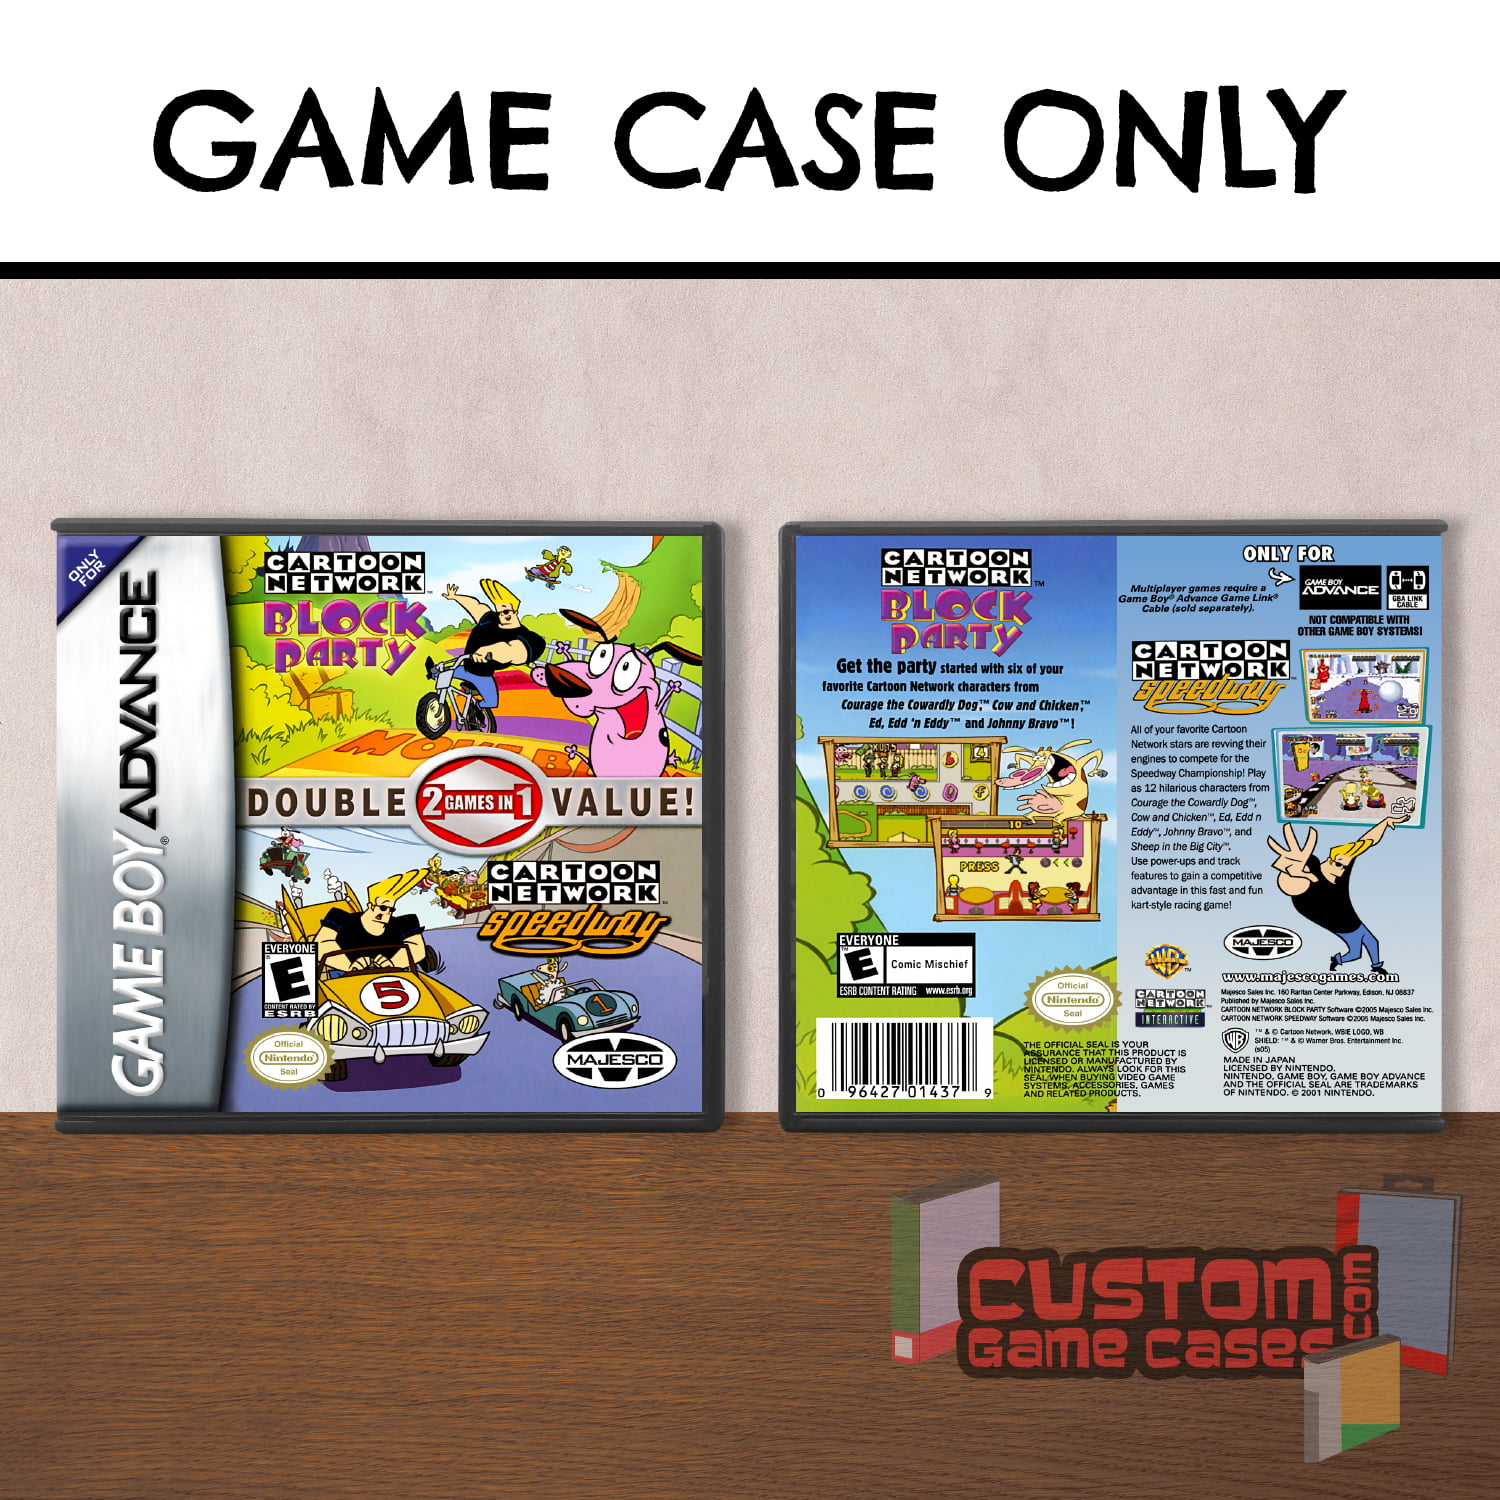 Get your game on and have a - Cartoon Network City